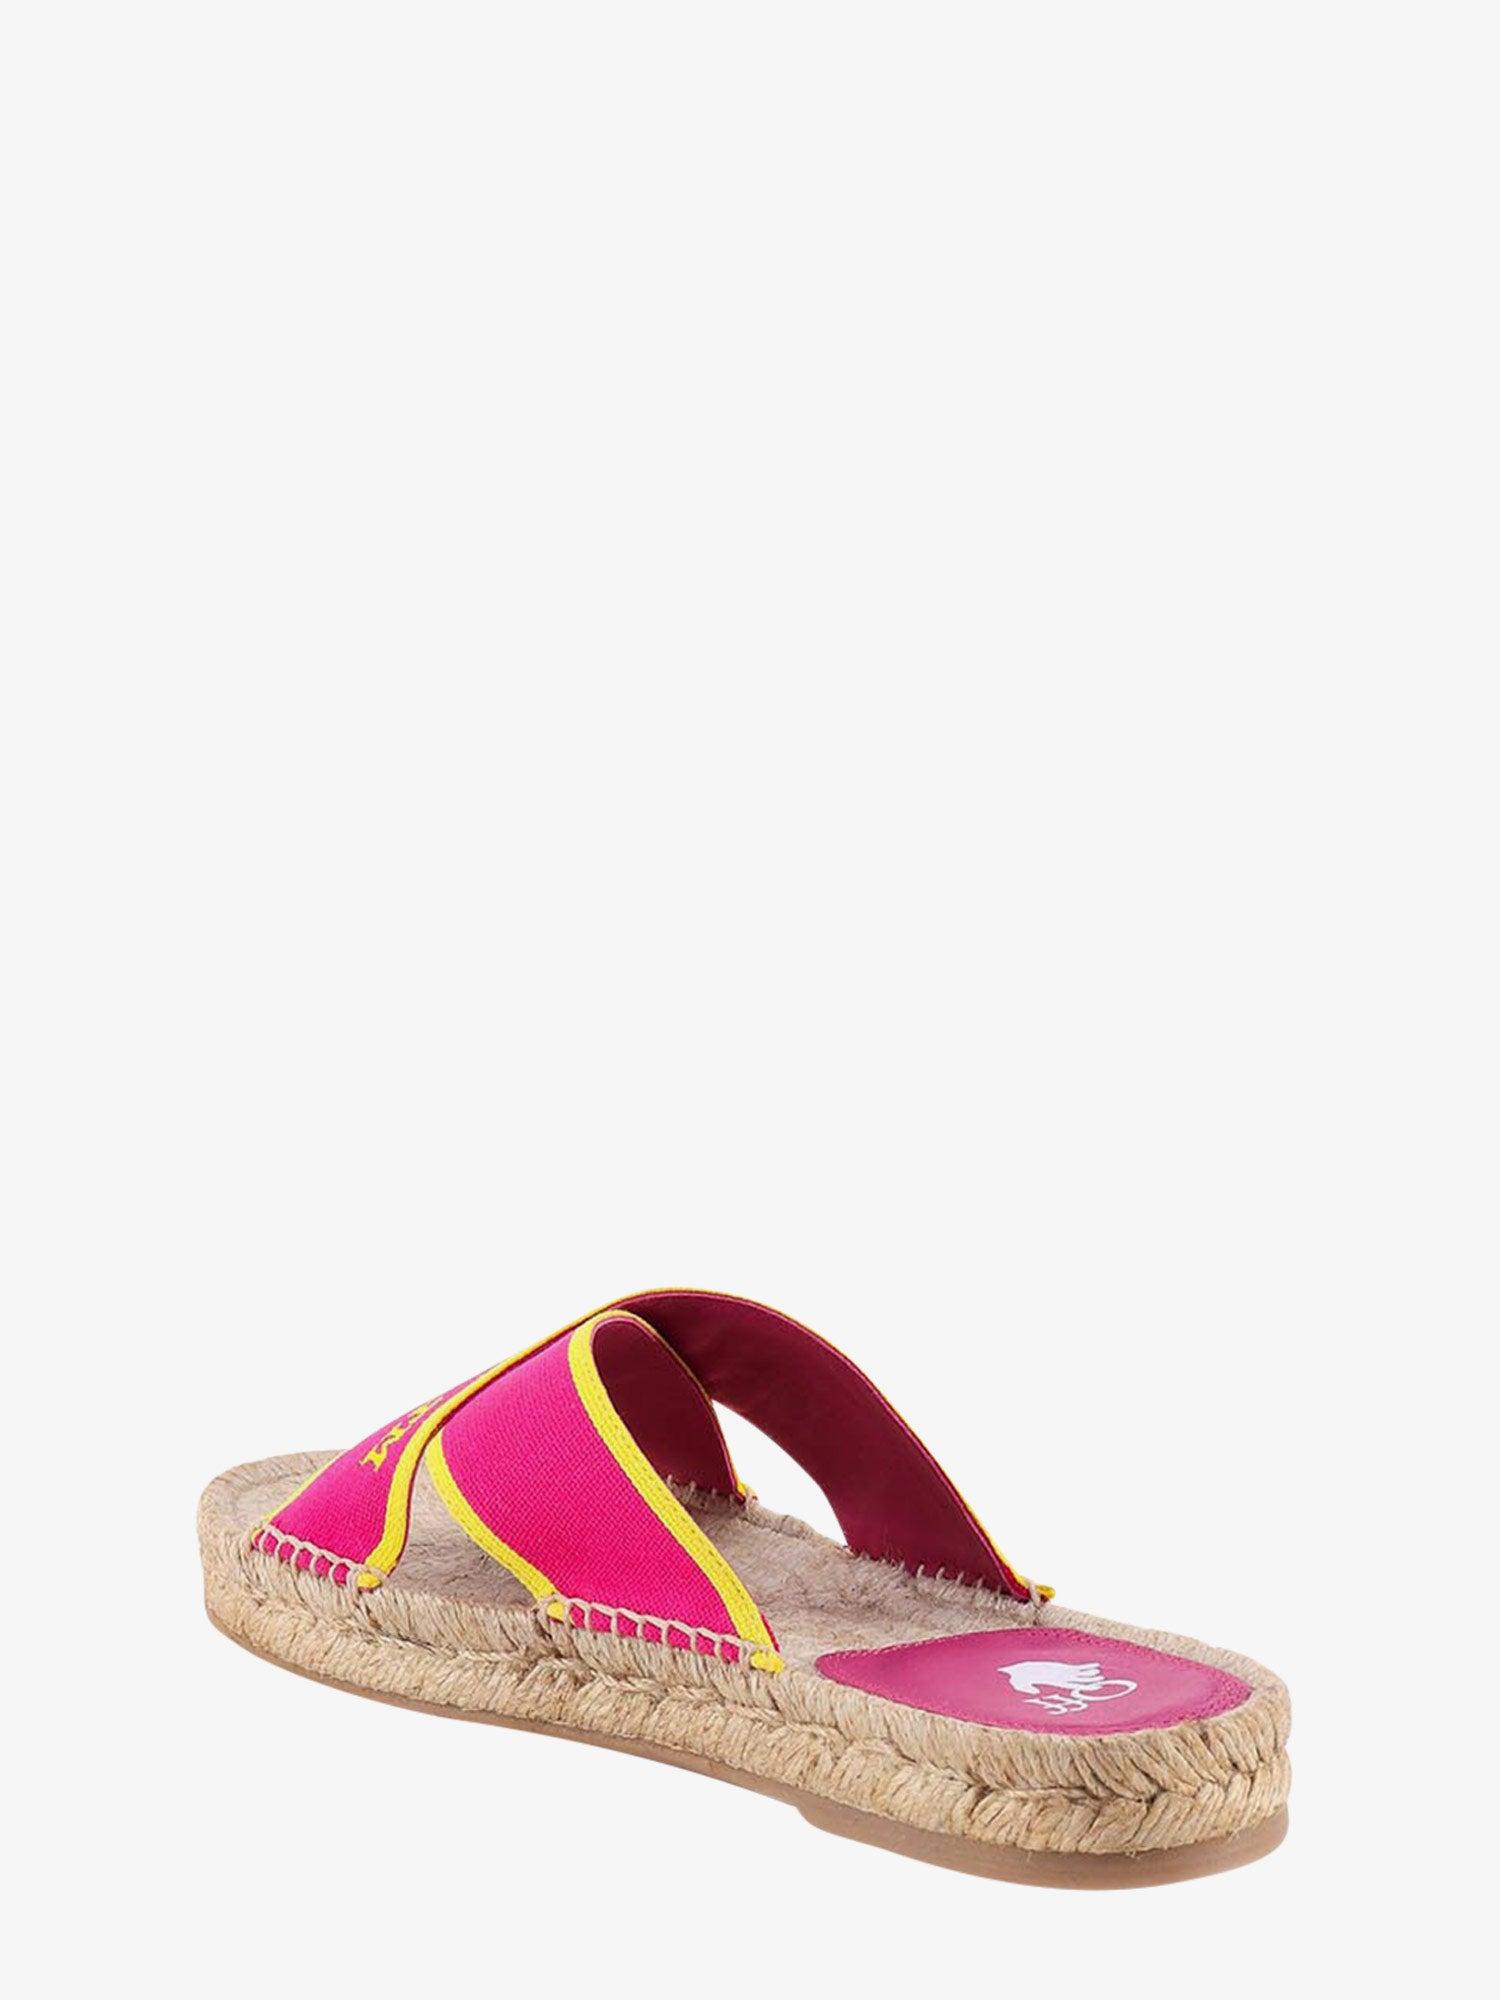 Off-White c/o Virgil Abloh Leather Espadrilles in Fuchsia (Pink) - Save 57%  | Lyst